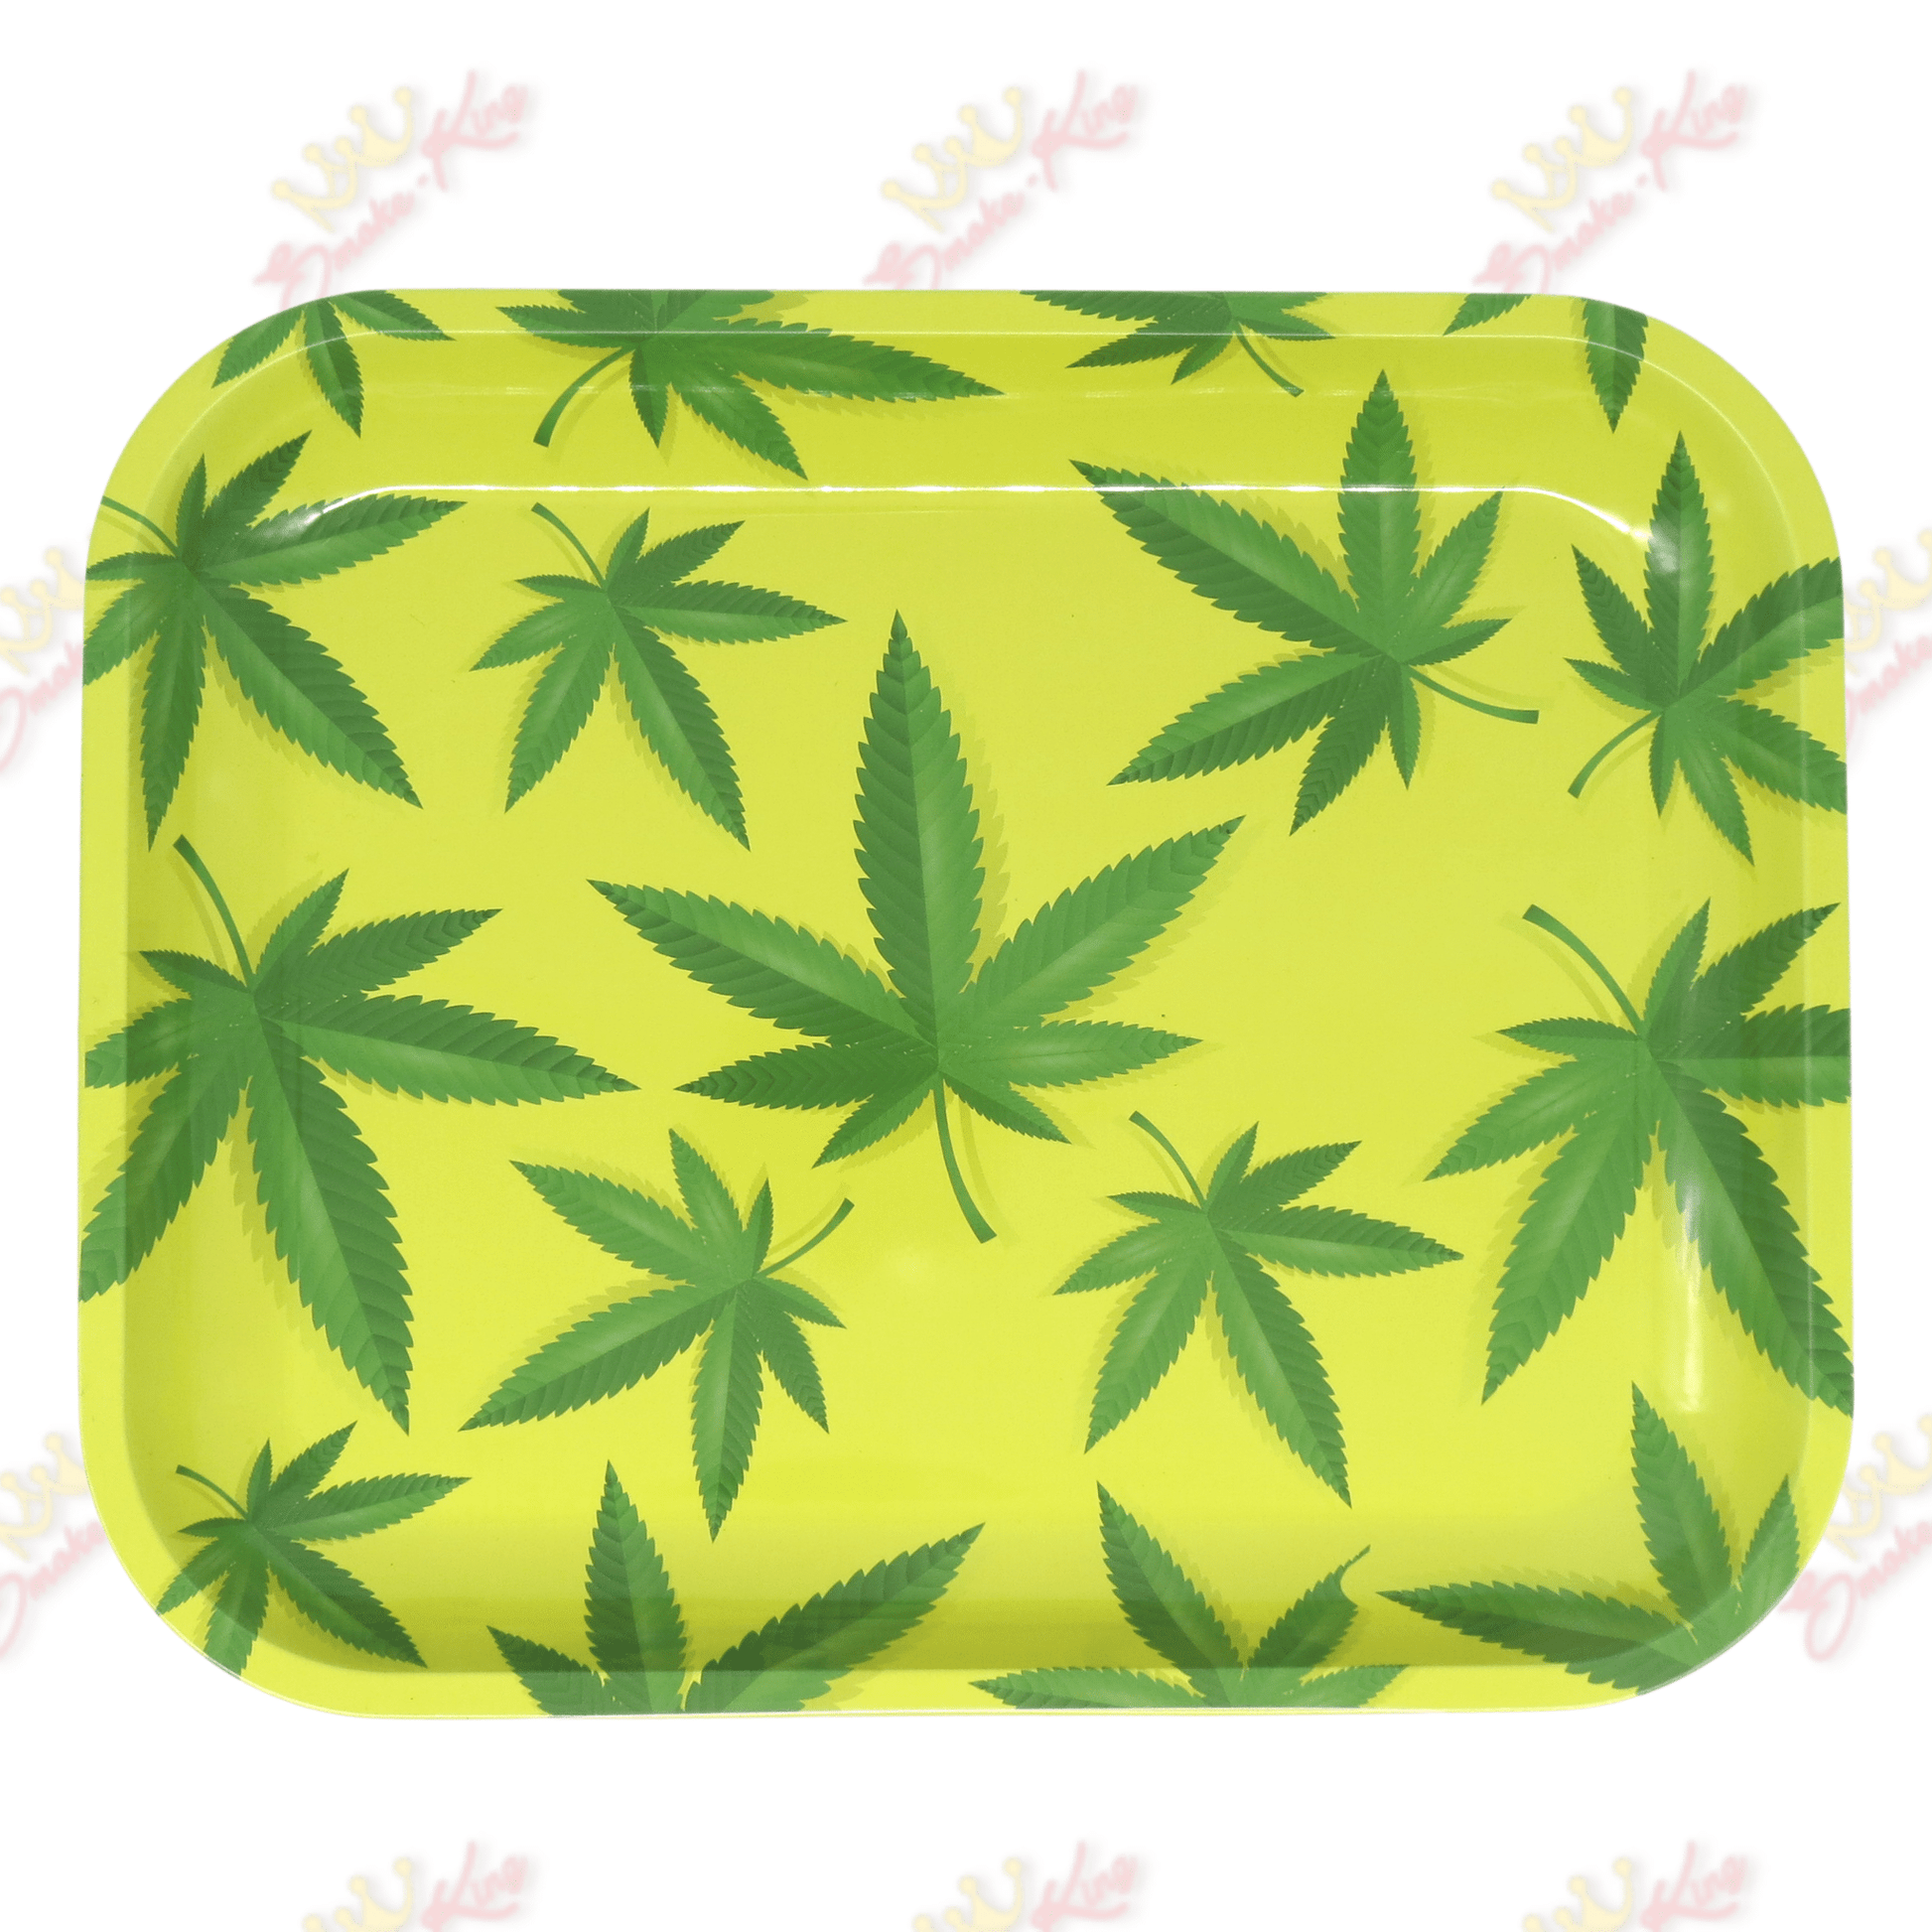 Smoke King rolling-trays Weed Rolling Tray Weed Rolling Tray | Smoke King